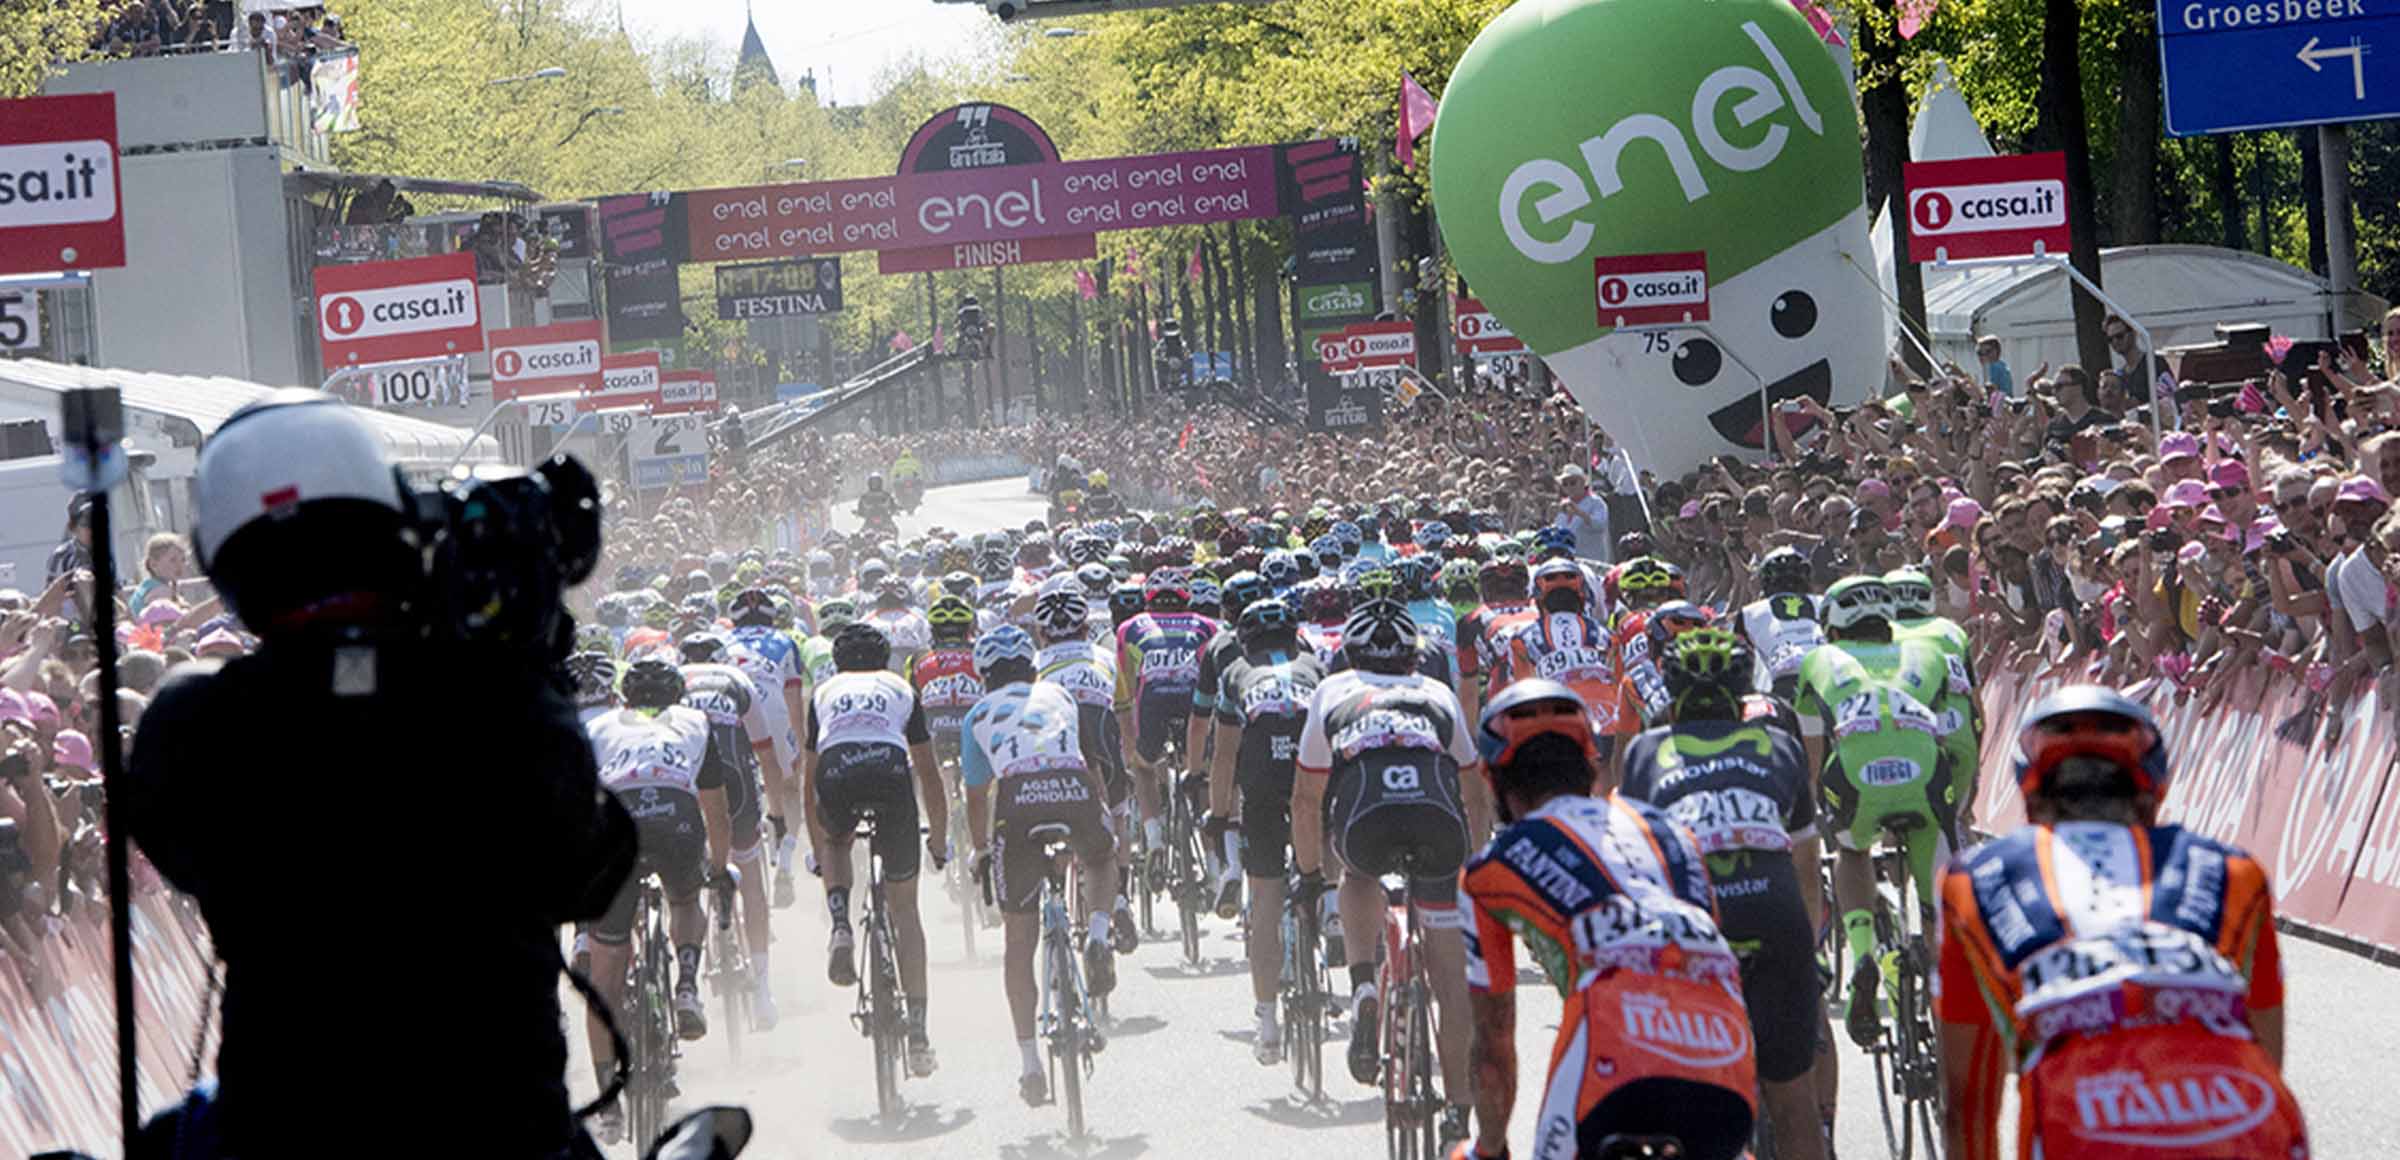 Enel at the Giro d'Italia number 100